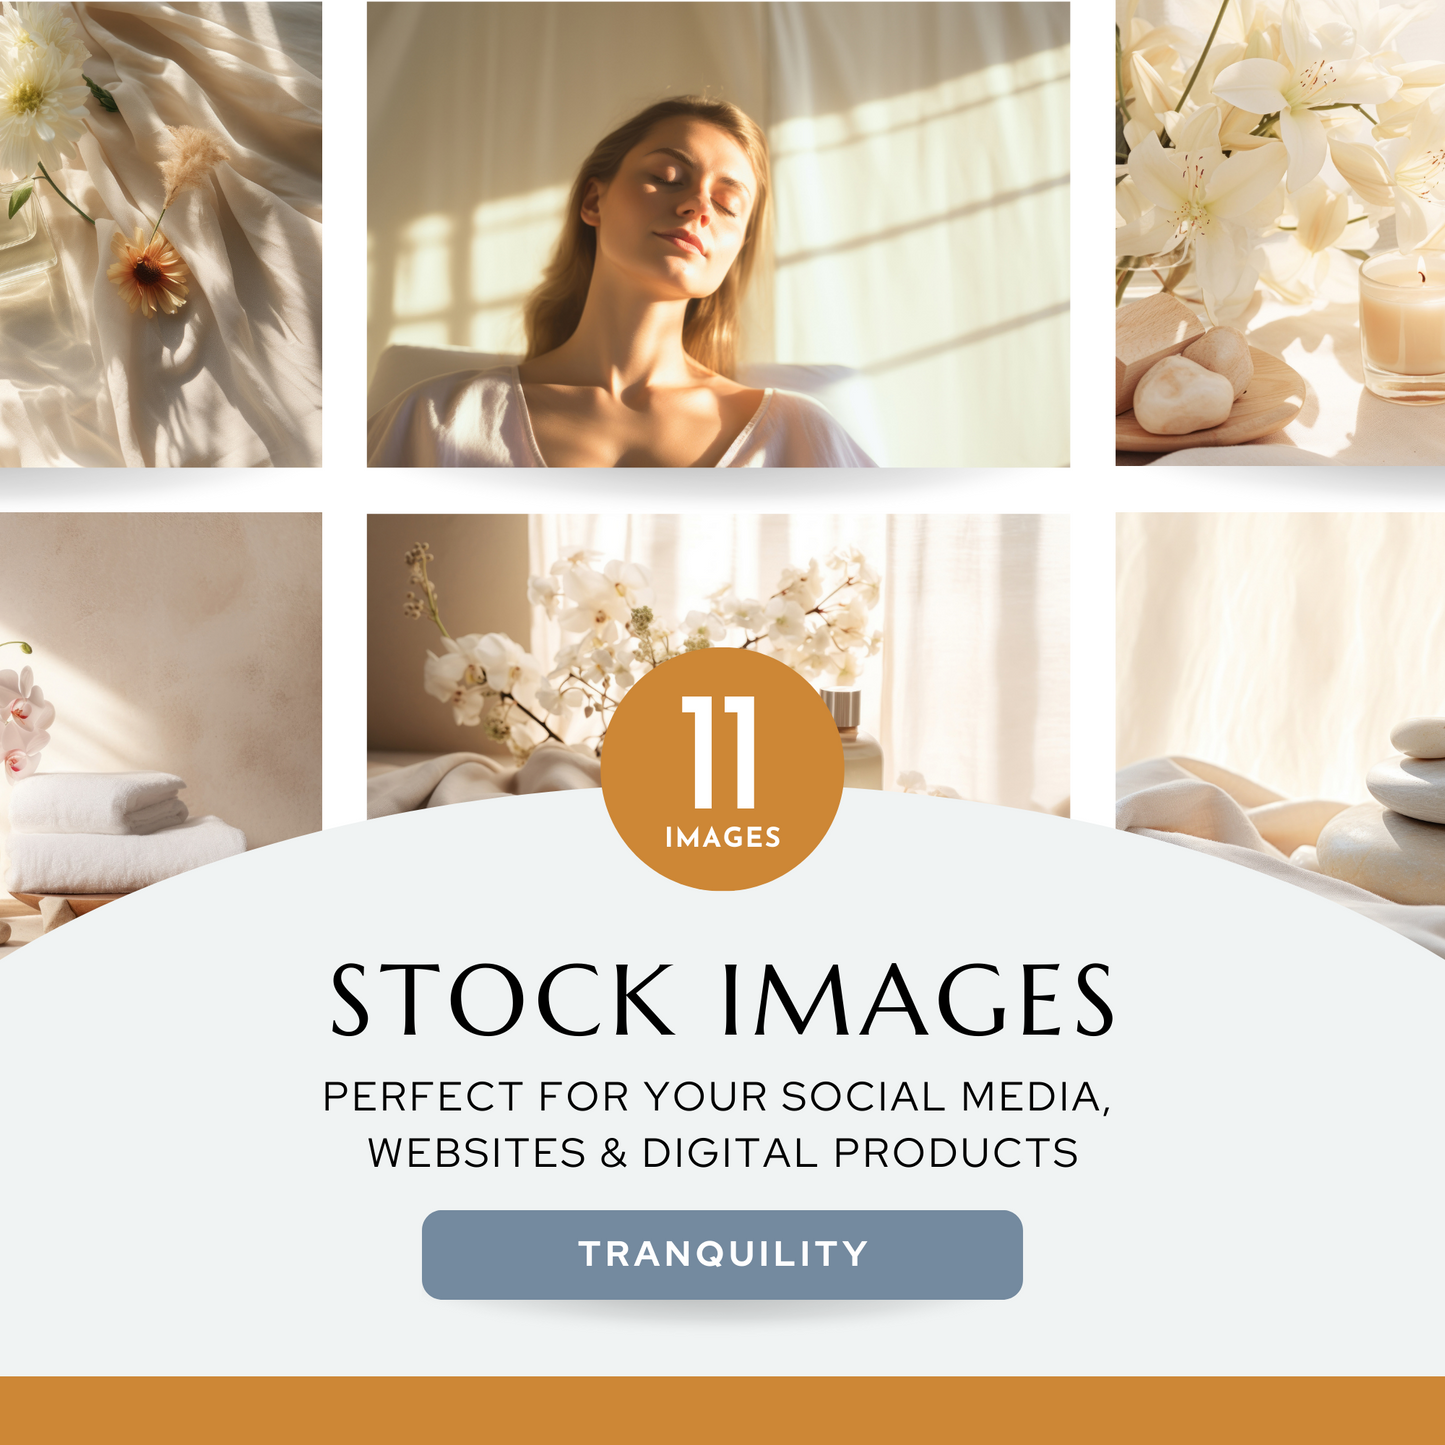 11 Styled Stock Images | Tranquility Collection